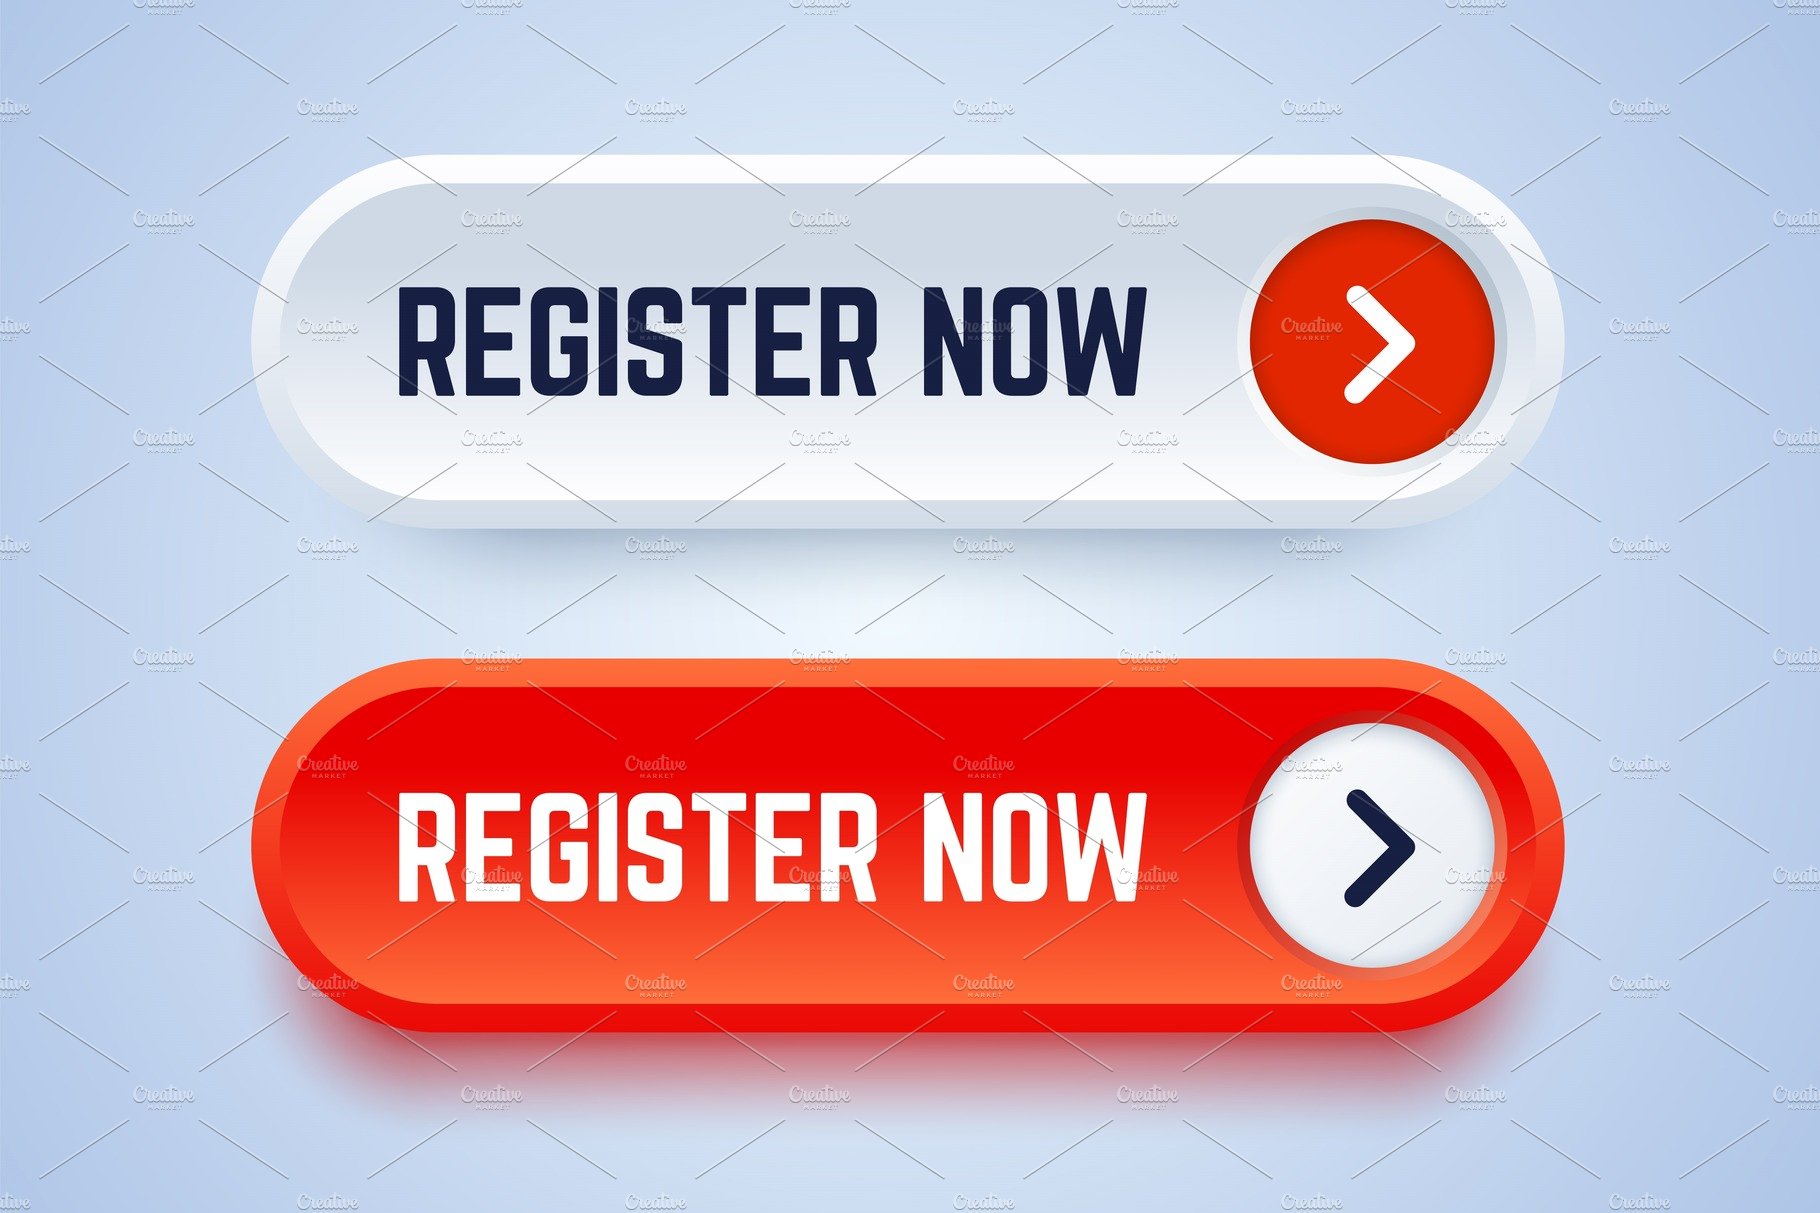 Register now buttons cover image.